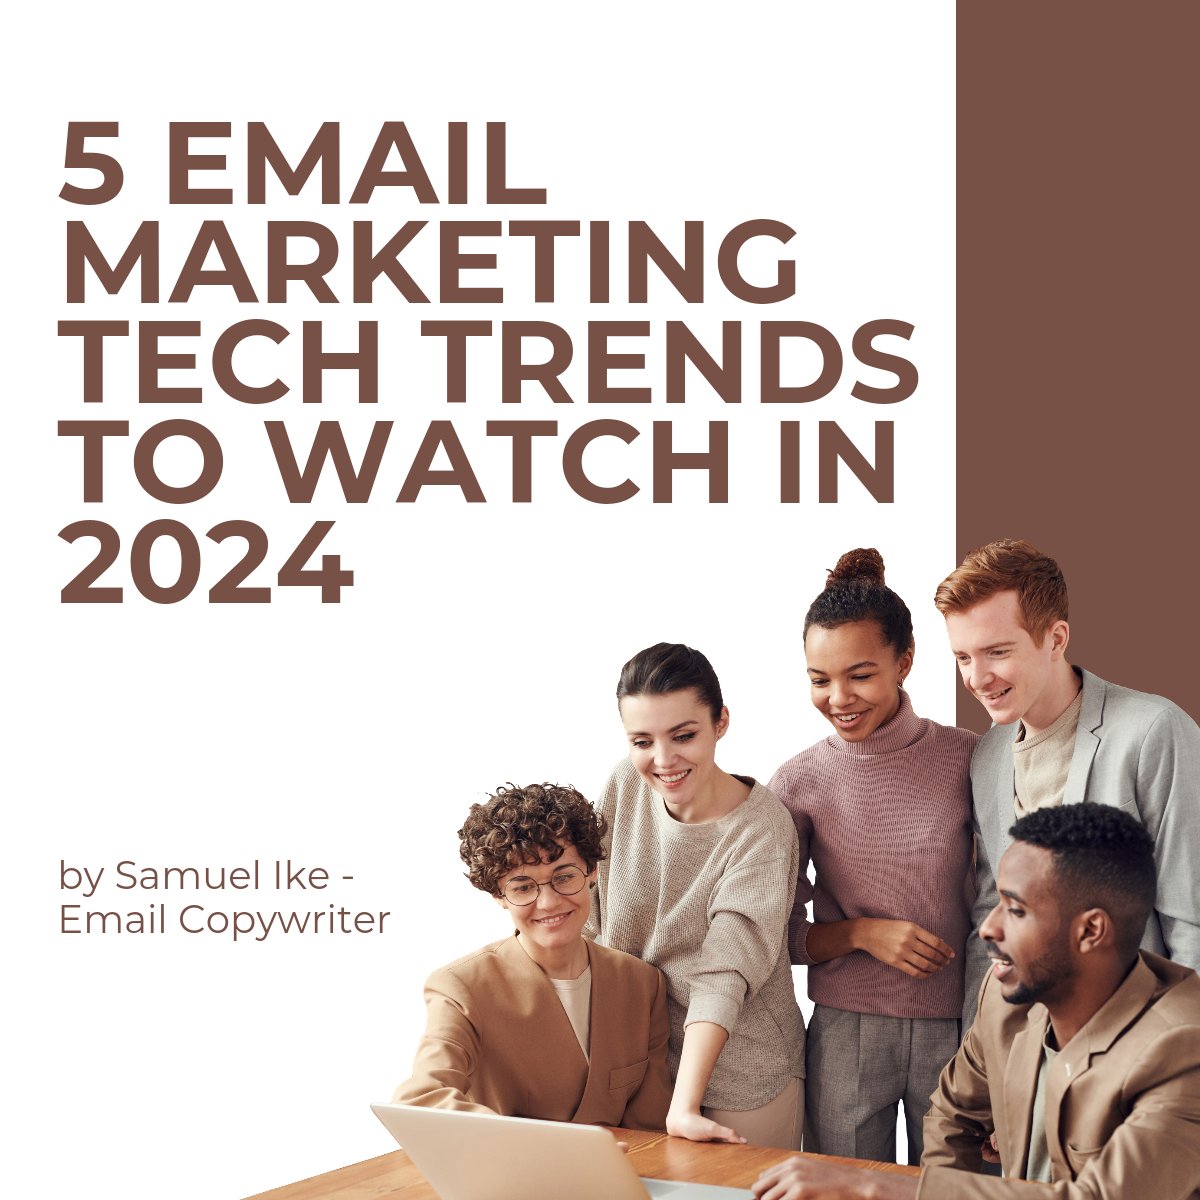 In this post, I'll share my predictions for the most promising email marketing tech trends in 2024. 

linkedin.com/posts/freelanc…

#emailmarketing #emailcopywriter #businessmarketing #businesssuccess #saas #emailcopywriterforhire #ecommerce #b2b #emailtips